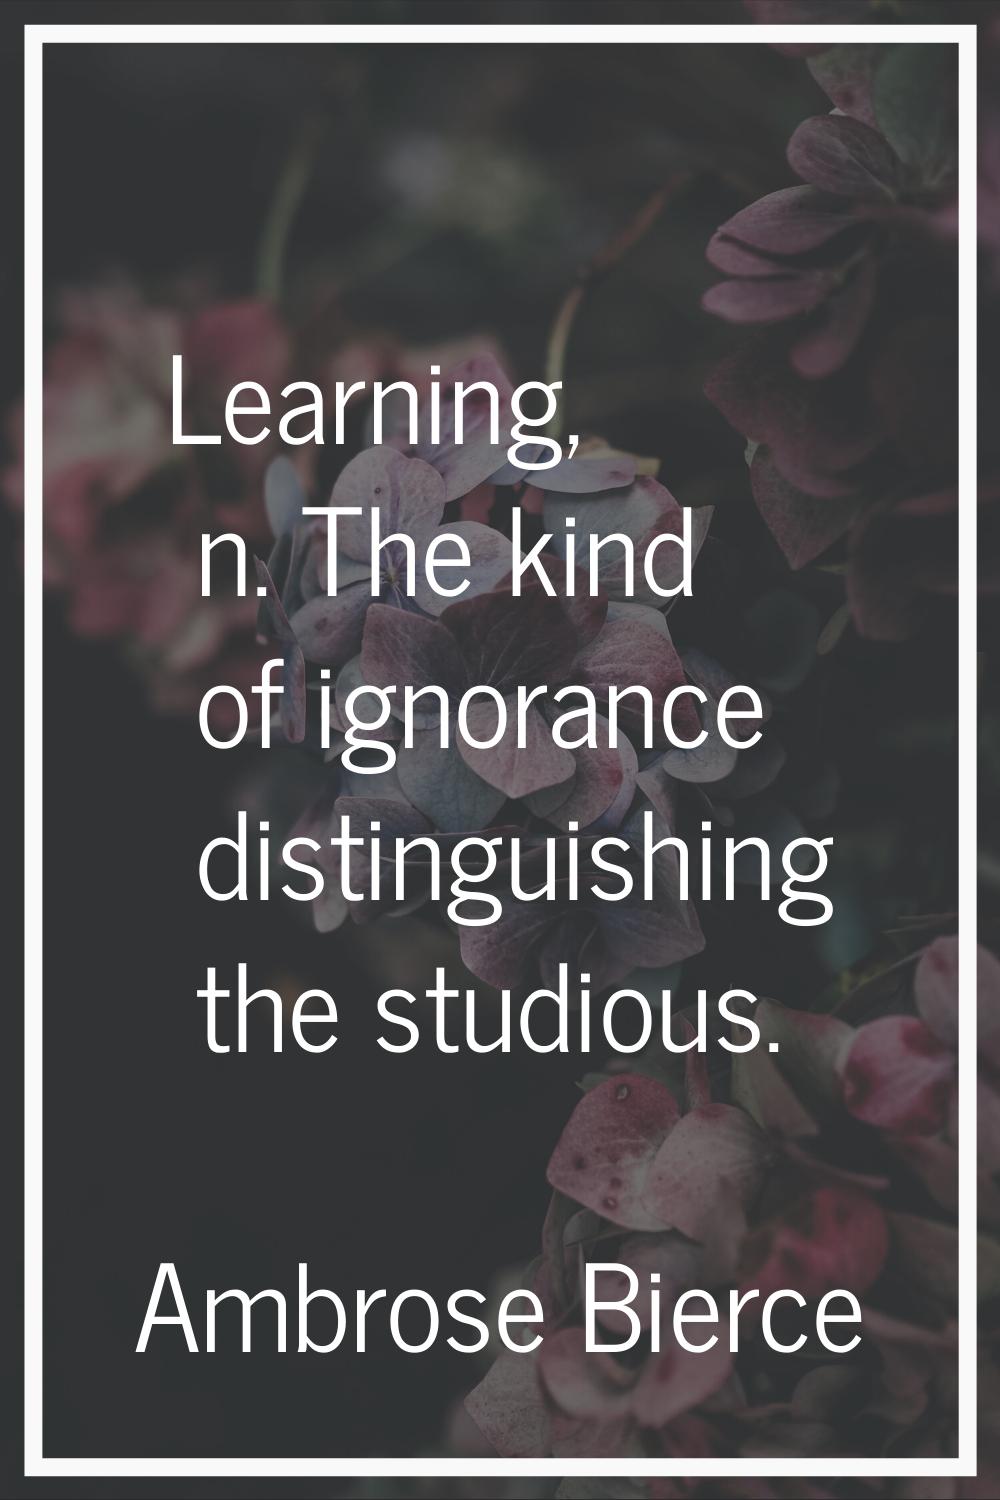 Learning, n. The kind of ignorance distinguishing the studious.